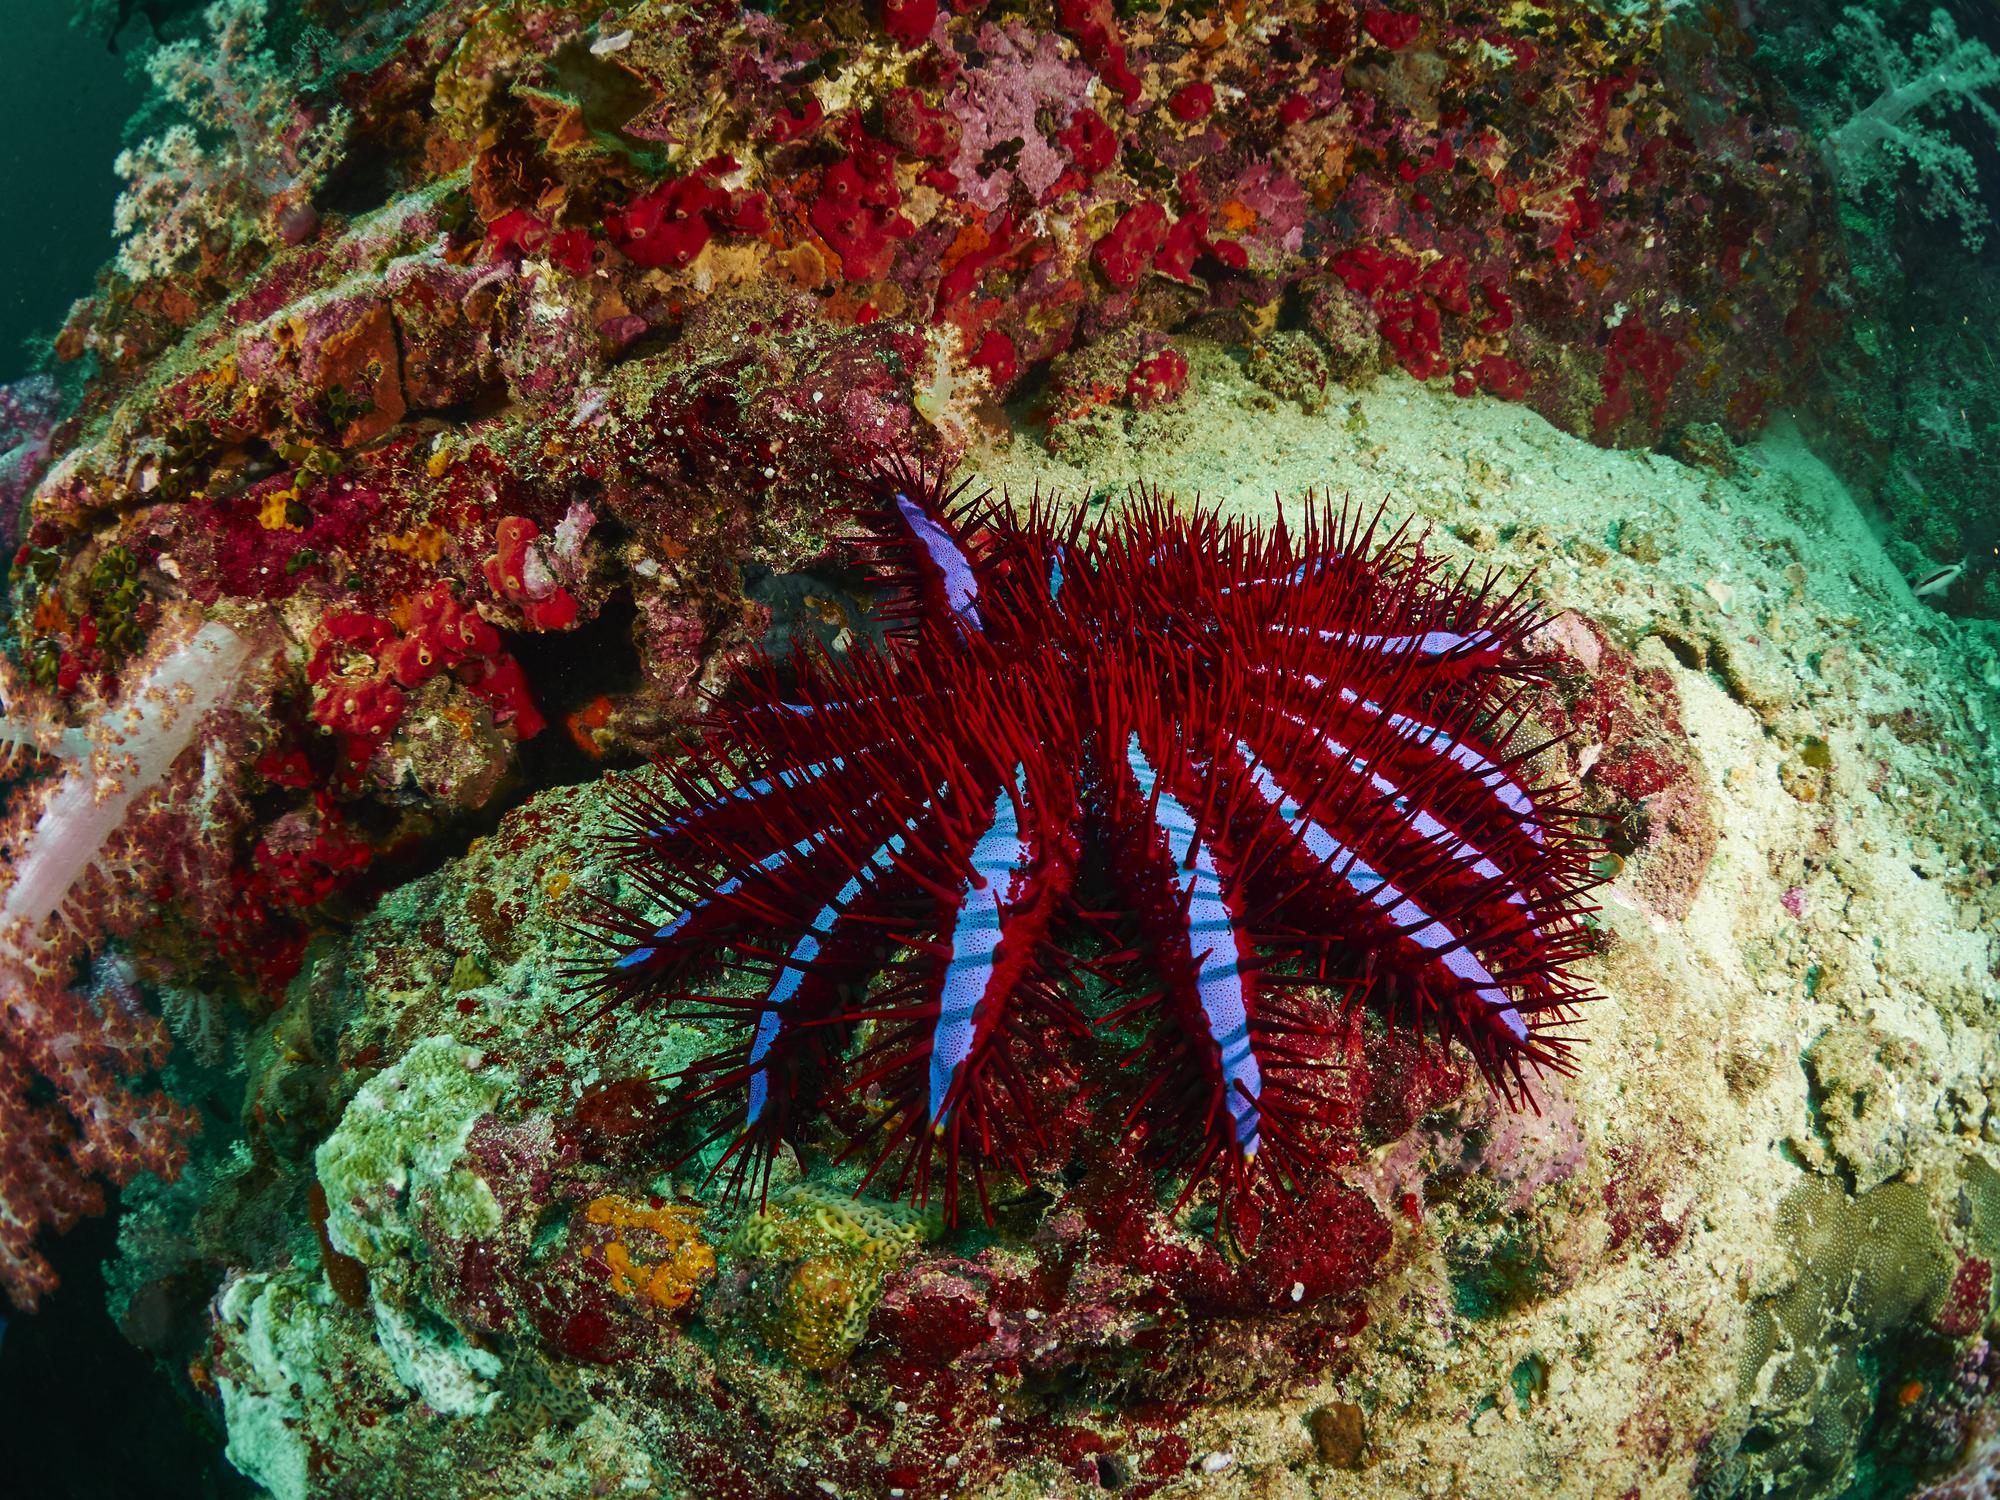 Crown-of-thorns starfish feed on coral and contribute to the decline of reefs